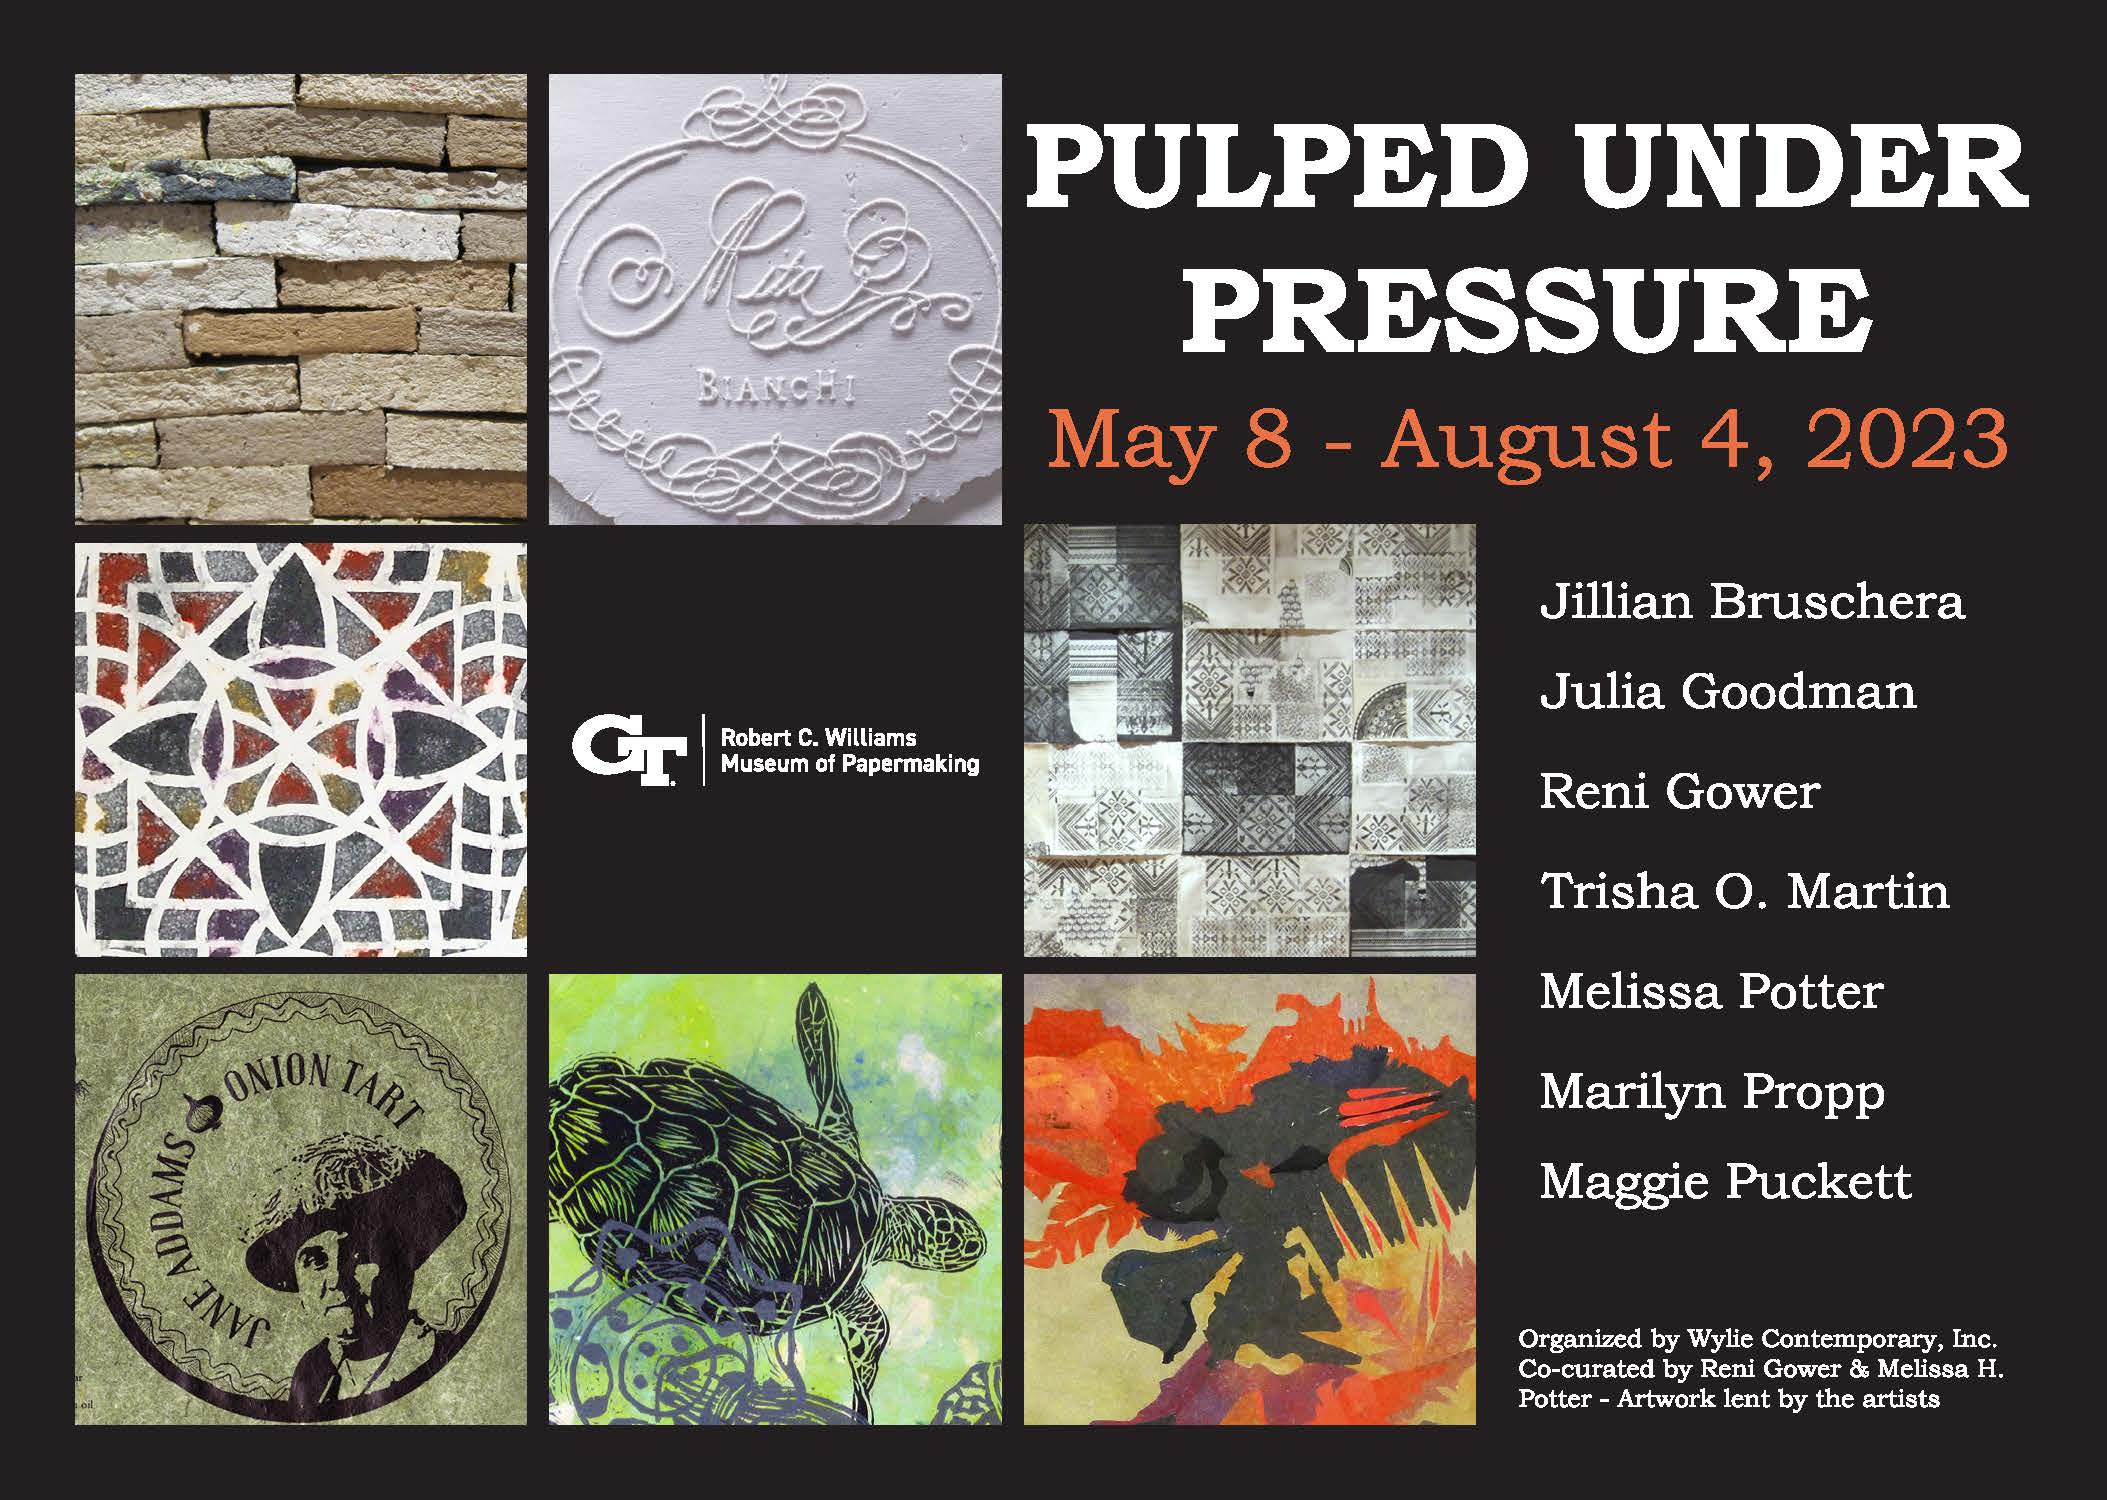 Black rectangle background with seven squares that show a detail shot of each of the seven artists in the exhibiti. The title "Pulped Under Pressure" sits at the center with the detail shots forming a square around it. To the right of the images the list of artist names appear.